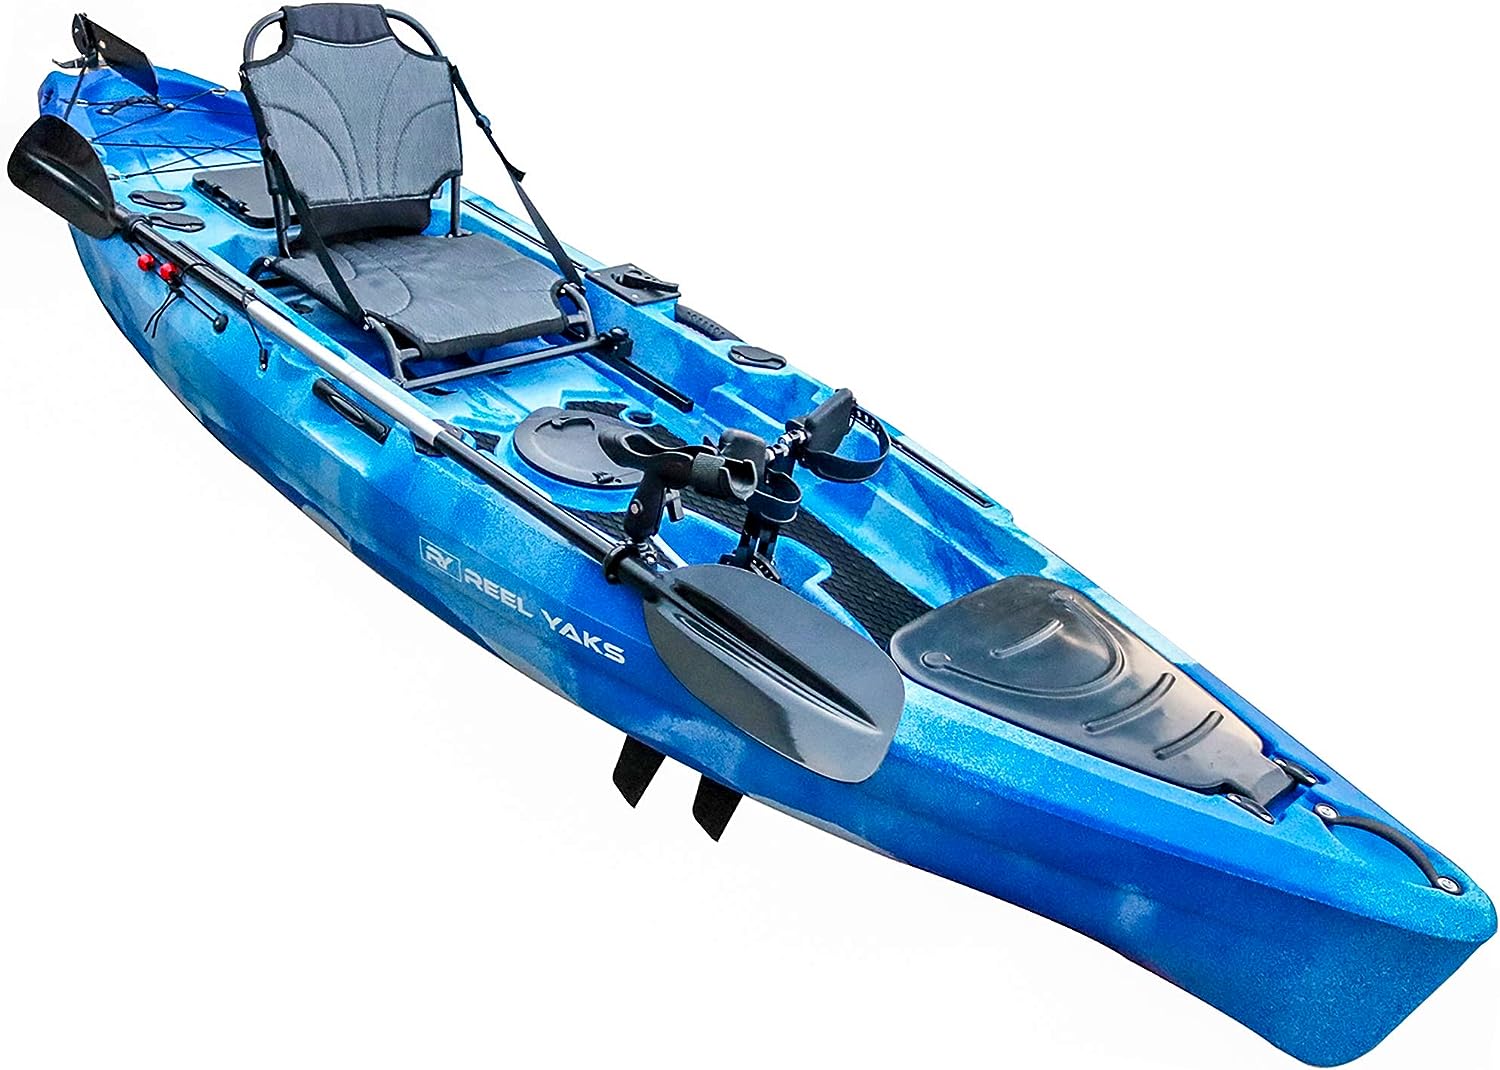 Fishing Kayak With Pedals: A Fisherman’s Friend